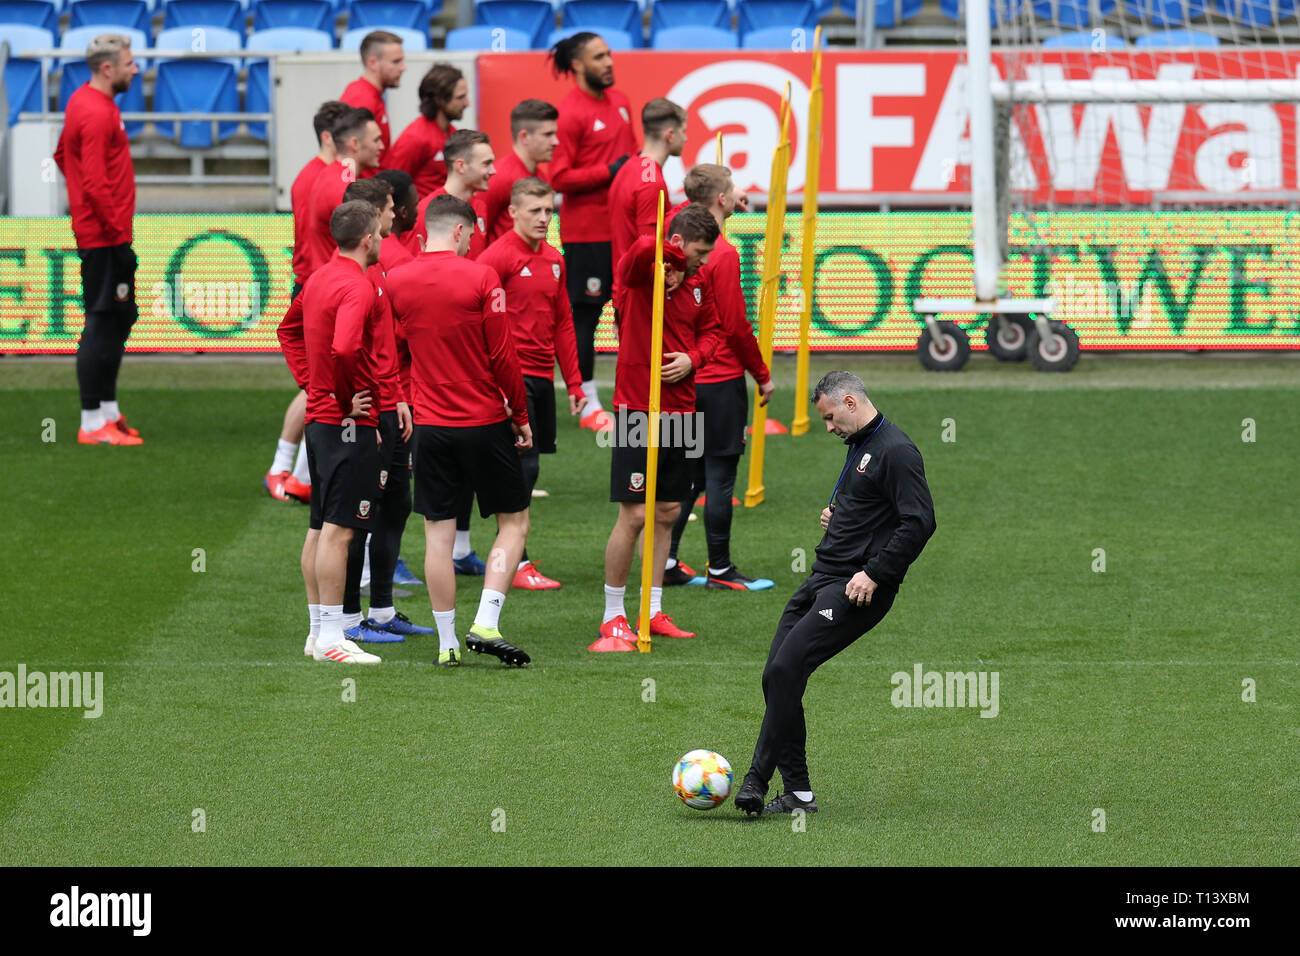 Cardiff, UK. 23rd Mar, 2019. Ryan Giggs, the Wales football team manager during the Wales football squad training at the Cardiff City Stadium in Cardiff, South Wales on Saturday 23rd March 2019. the team are preparing for their UEFA Euro 2020 quailfier against Slovakia tomorrow. pic by Andrew Orchard/Alamy Live News Stock Photo